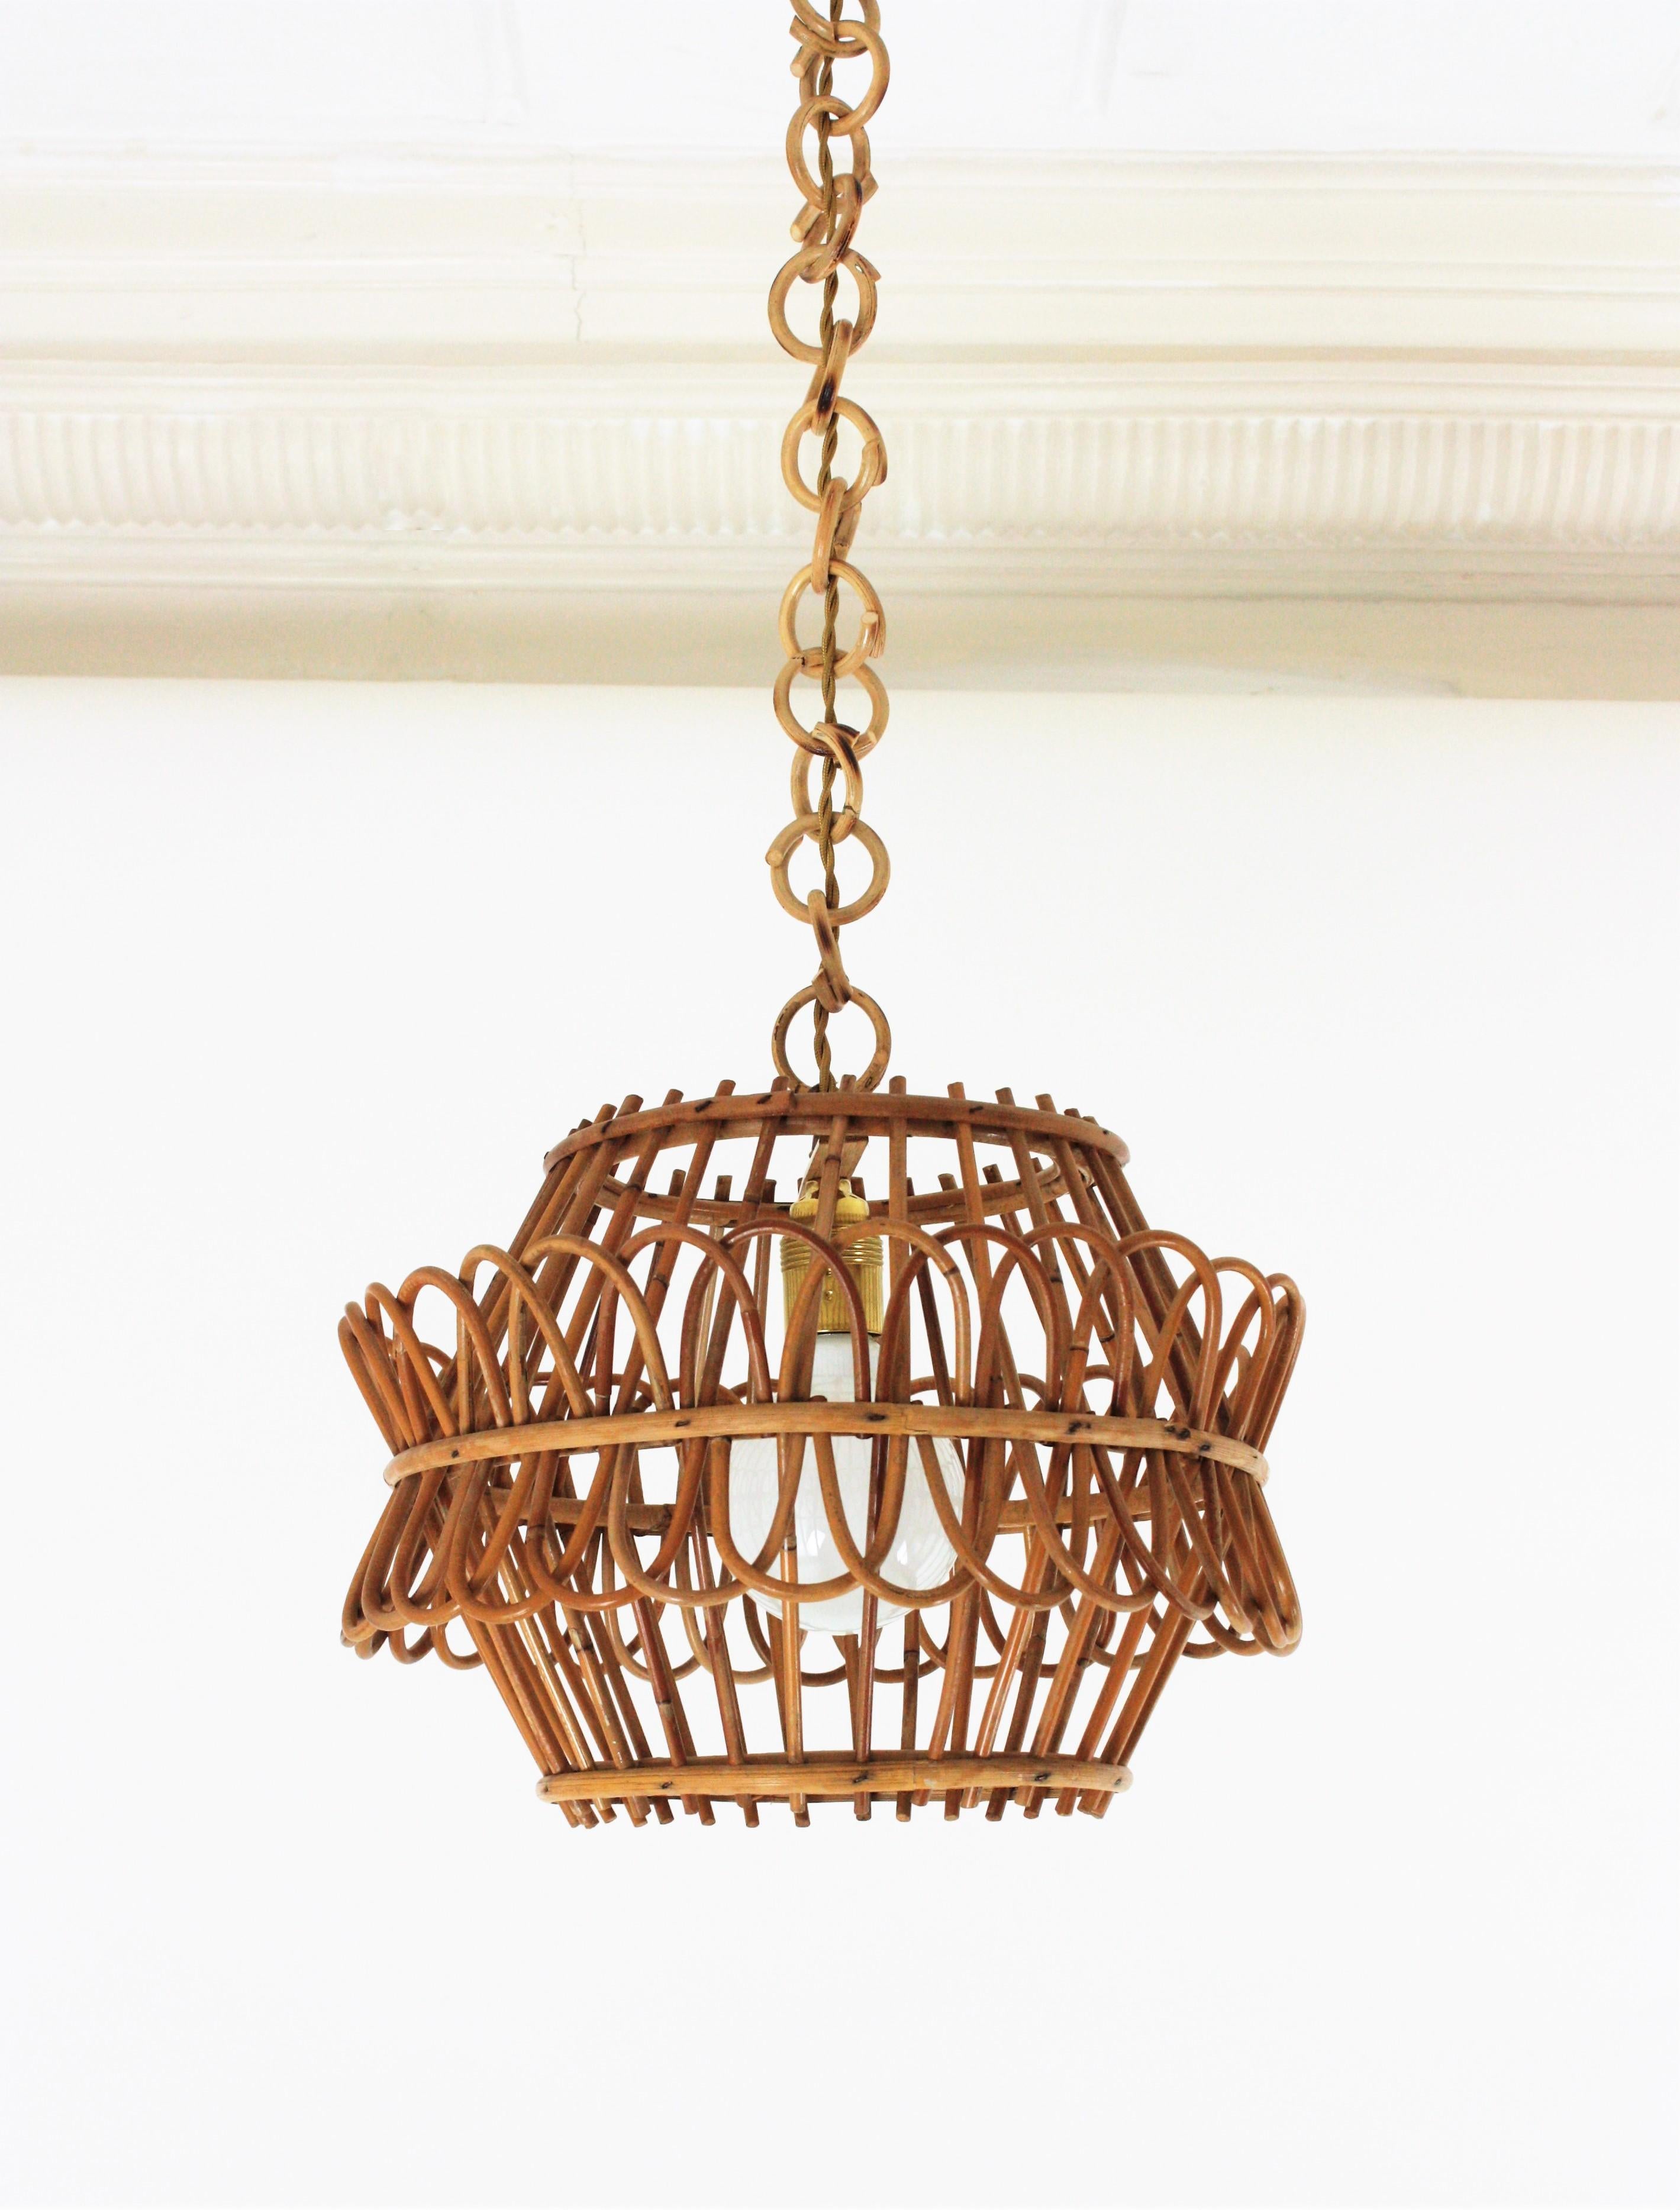 Hand-Crafted French Pendant Light or Lantern in Rattan, 1950s For Sale